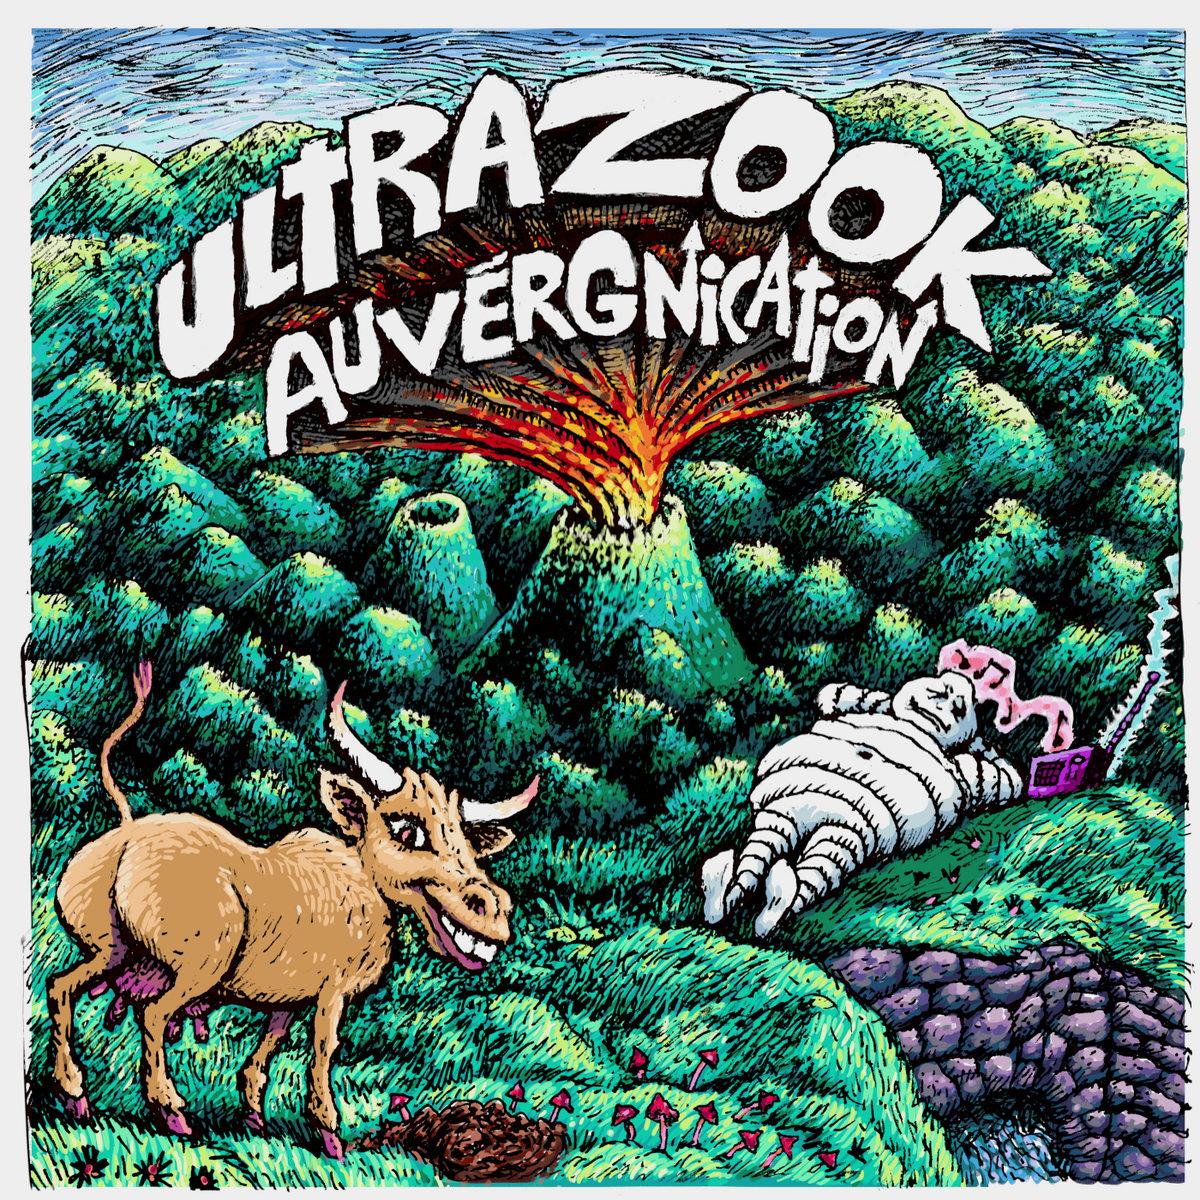 Ultra zook auvergnification